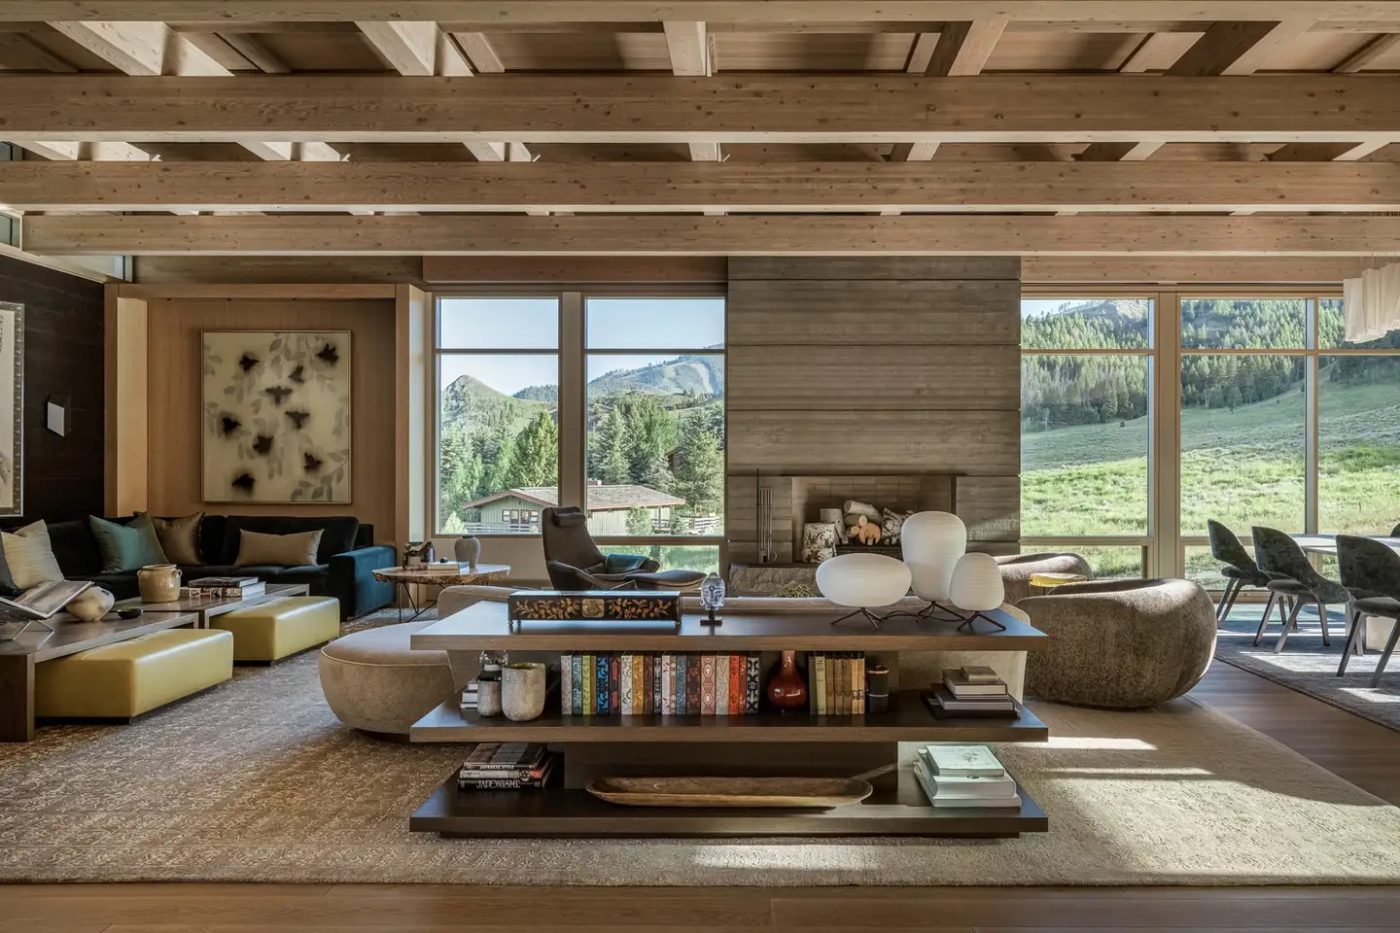 Living room of a vacation home in Sun Valley, Idaho designed by Lucas